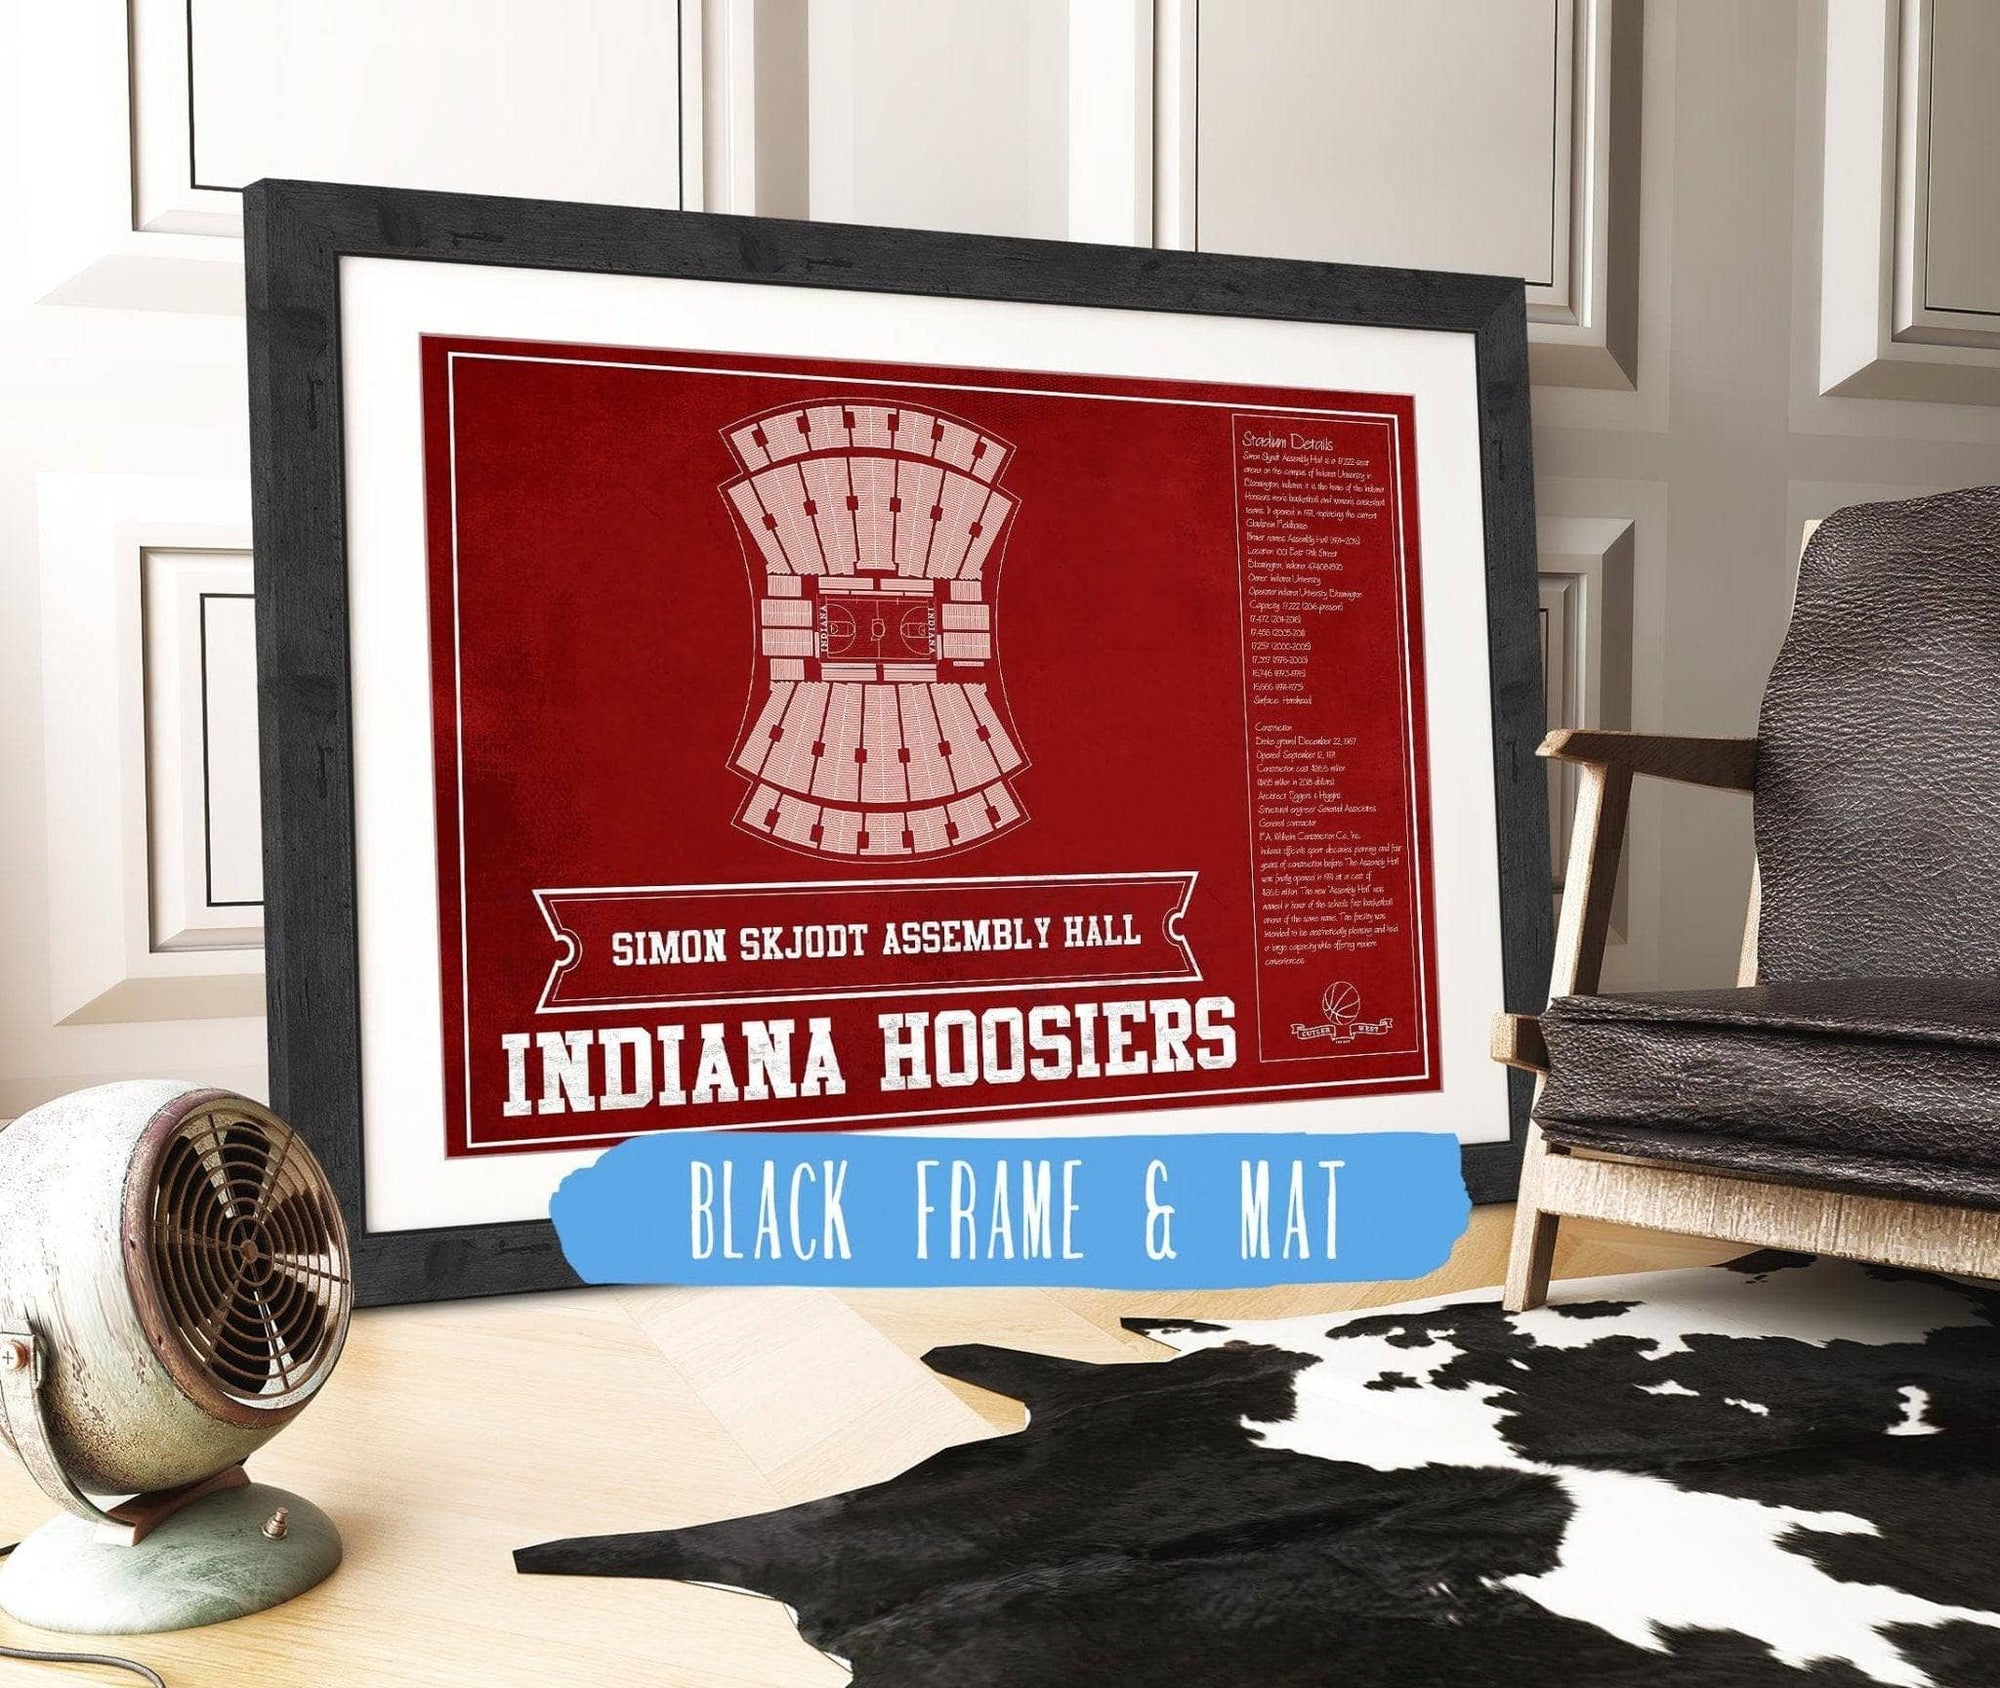 Cutler West Basketball Collection 14" x 11" / Black Frame & Mat Simon Skjodt Assembly Hall Indiana Hoosiers Team Color NCAA Vintage Print 933350232_83362